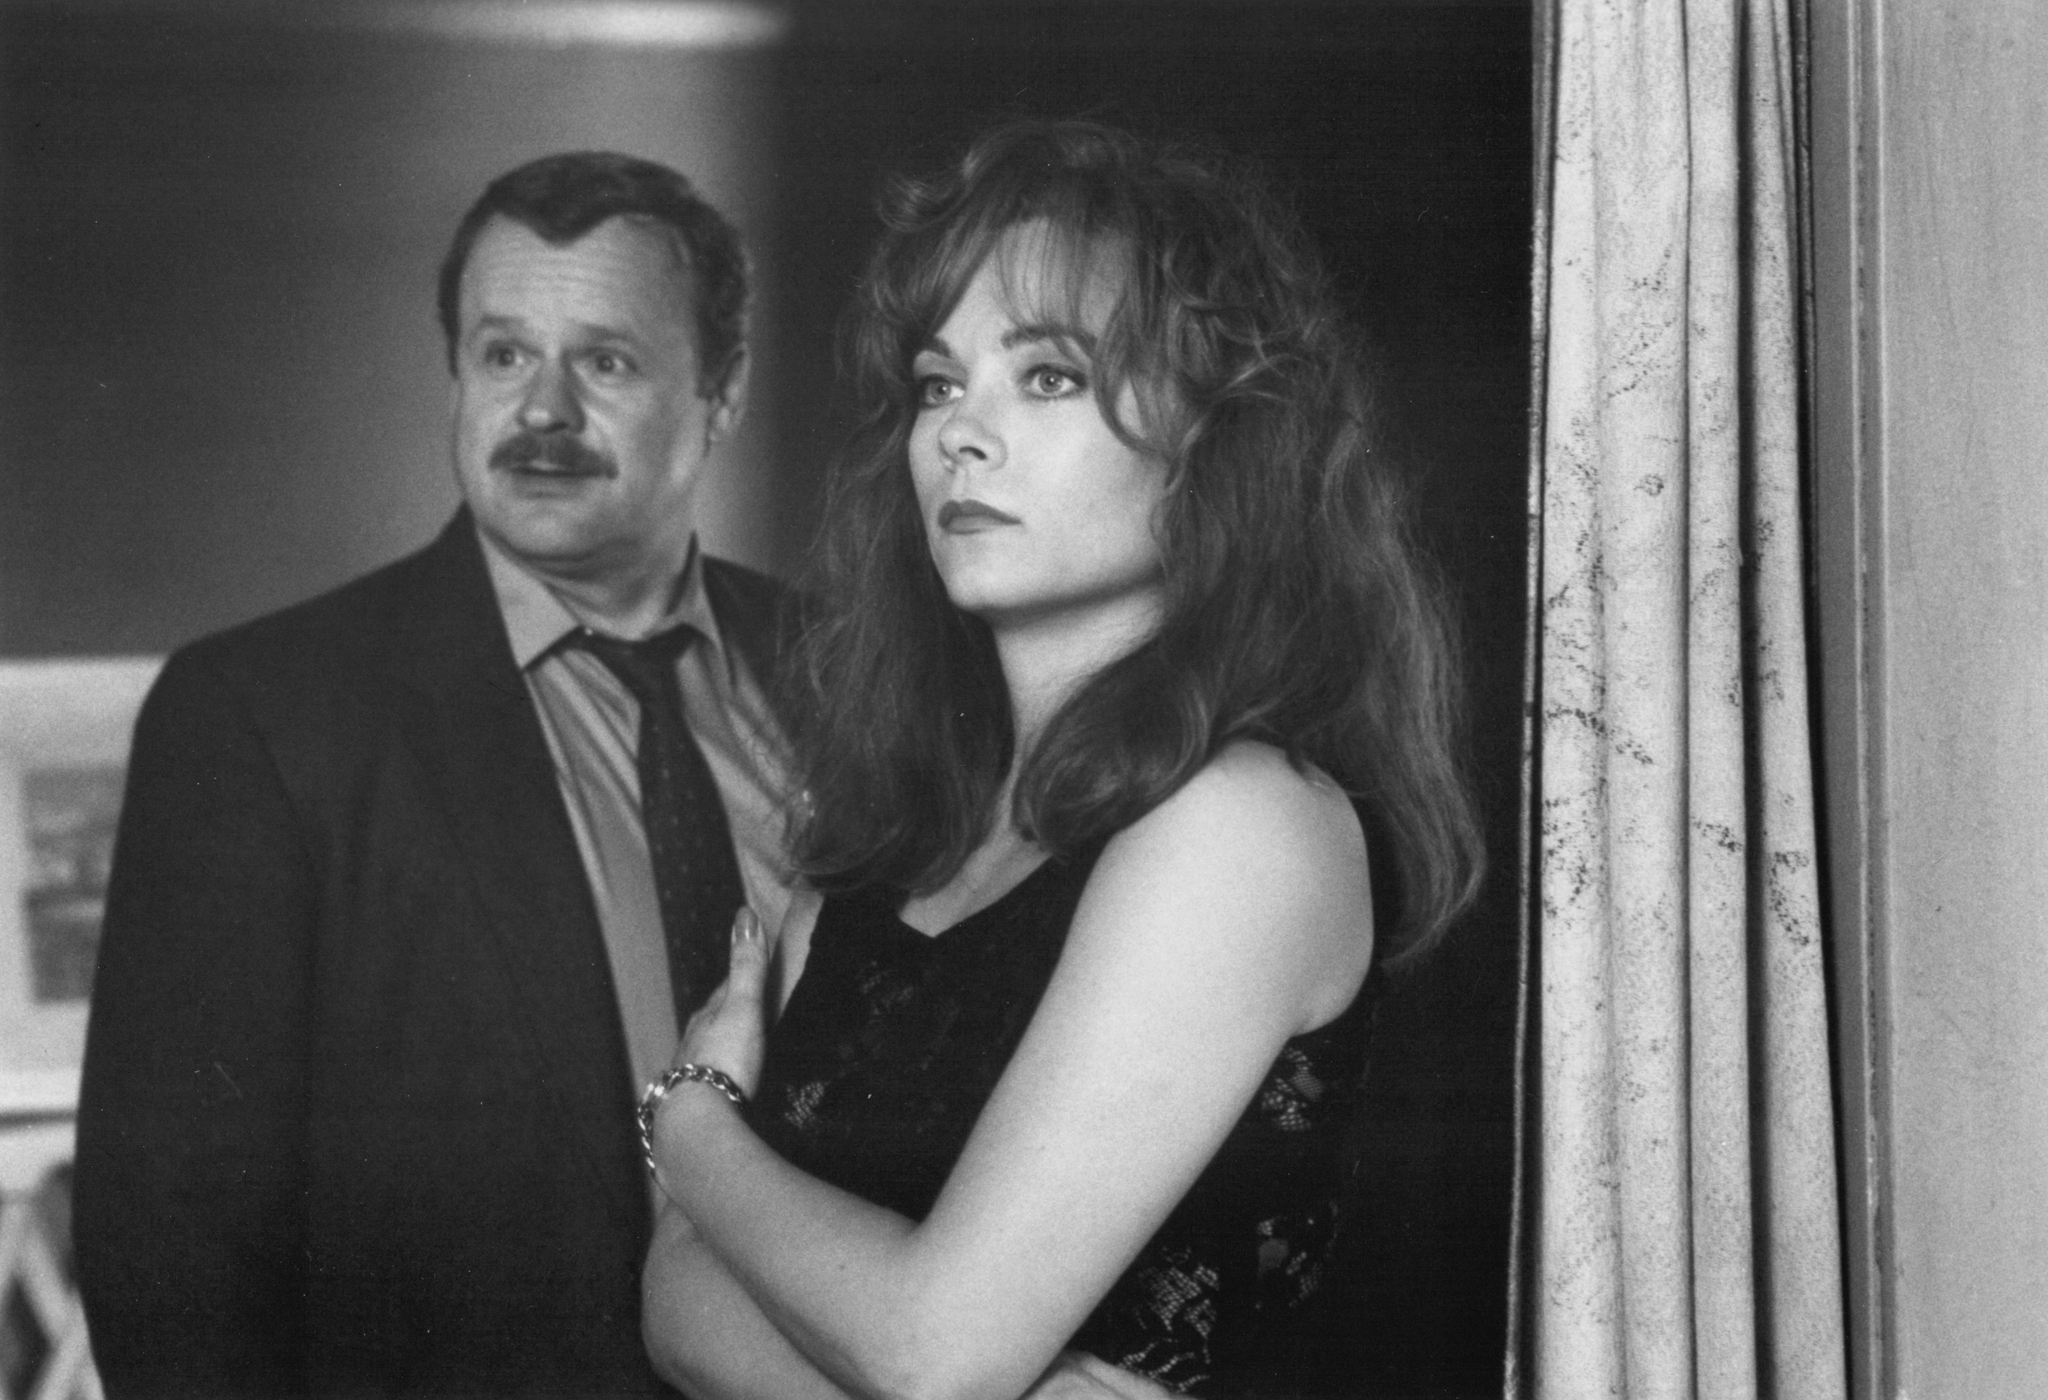 Theresa Russell and George Dzundza in Impulse (1990)